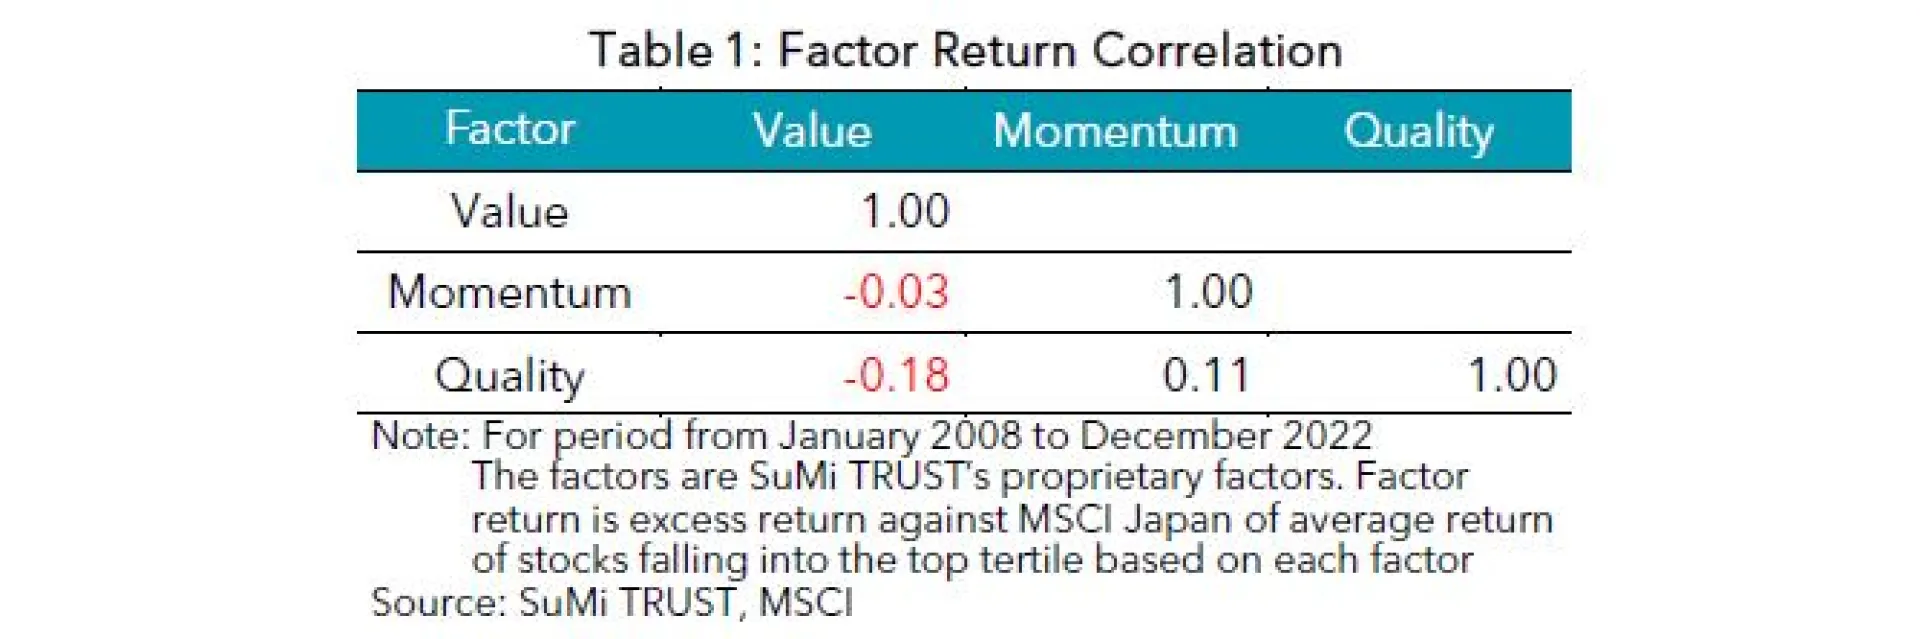 factor investment table 1